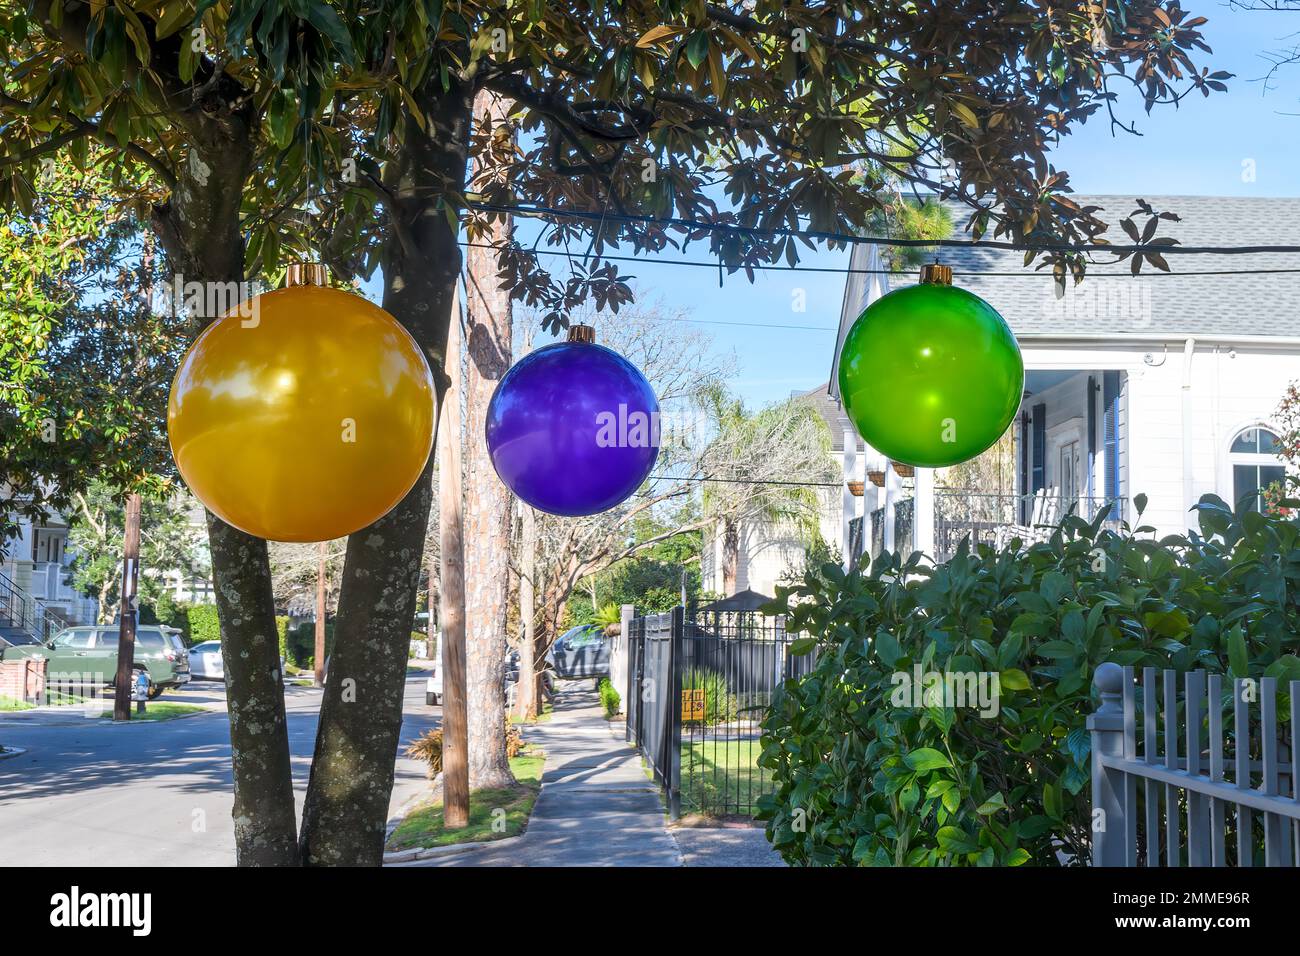 NEW ORLEANS, LA, USA - JANUARY 19, 2023: Large ornaments in Mardi Gras colors (purple, green and gold) decorate a tree in an Uptown neighborhood for c Stock Photo